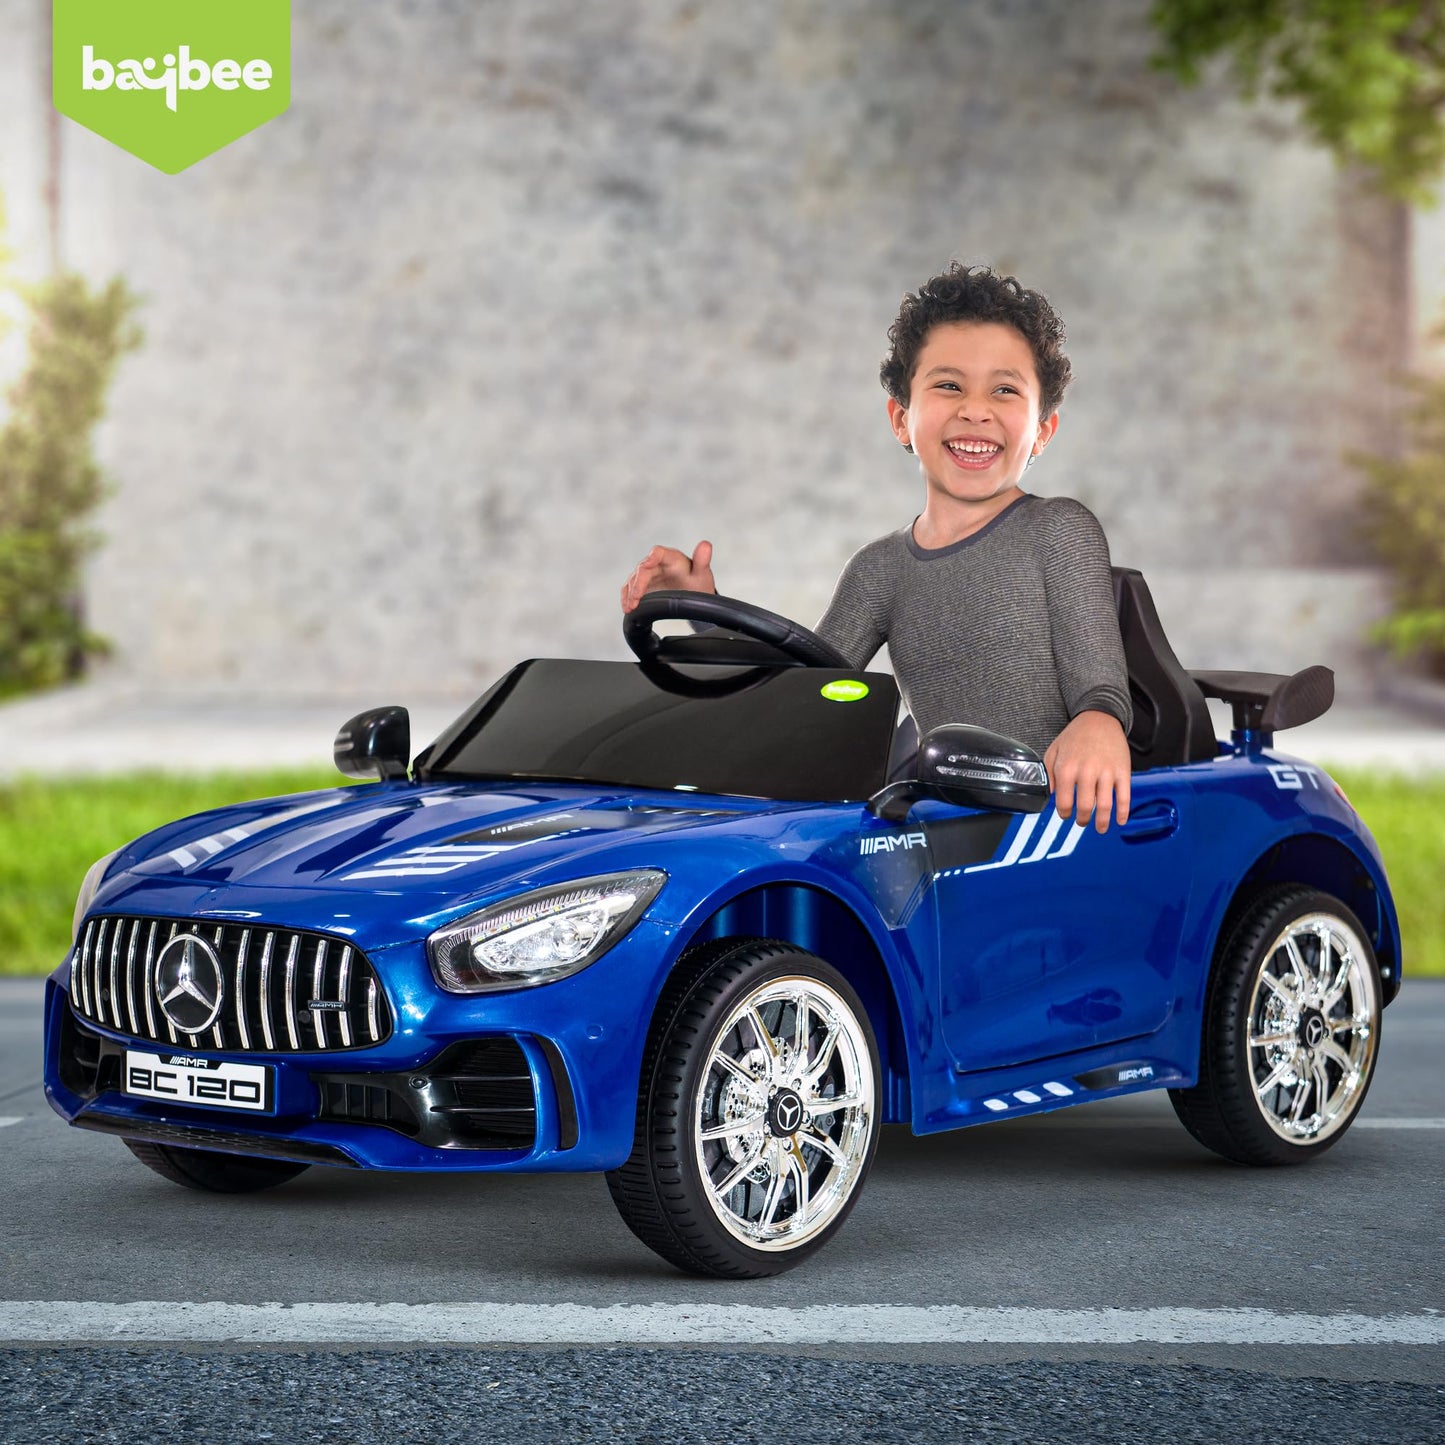 Baybee Spyder Rechargeable Battery Operated Car for Kids, Ride on Toy Kids Car with Music, USB, Safety Belt